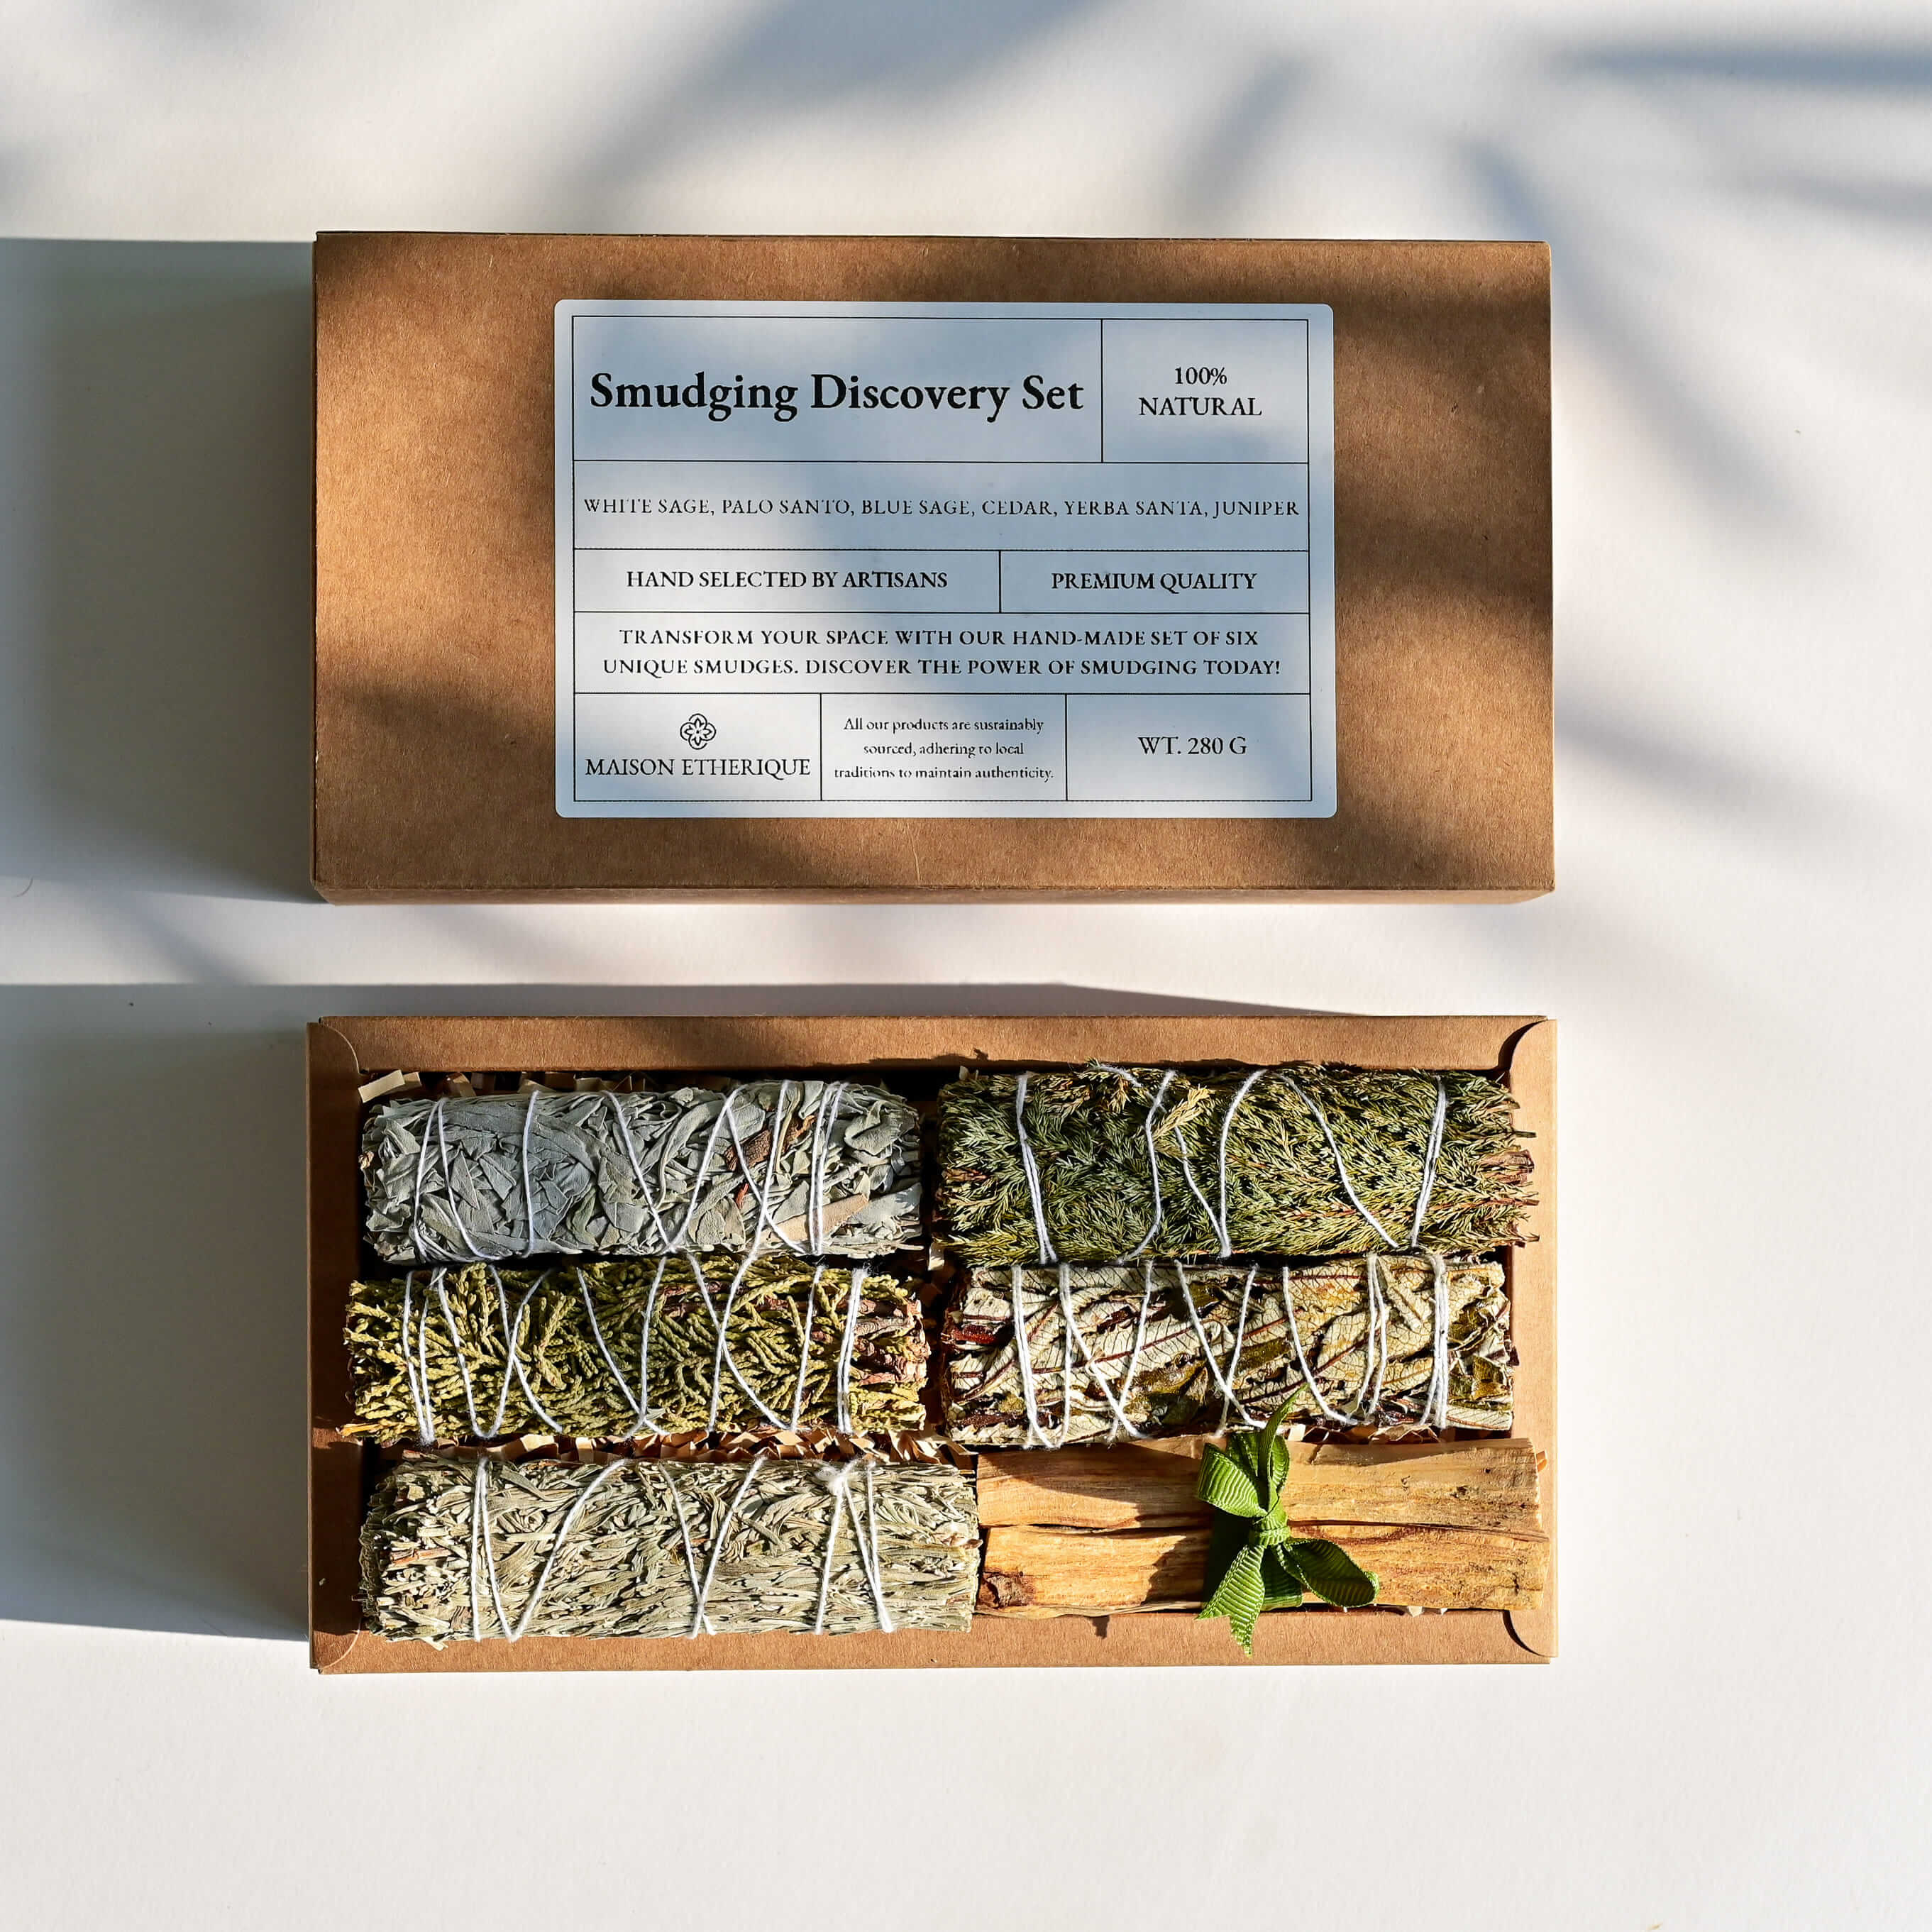 Smudging Discovery Set